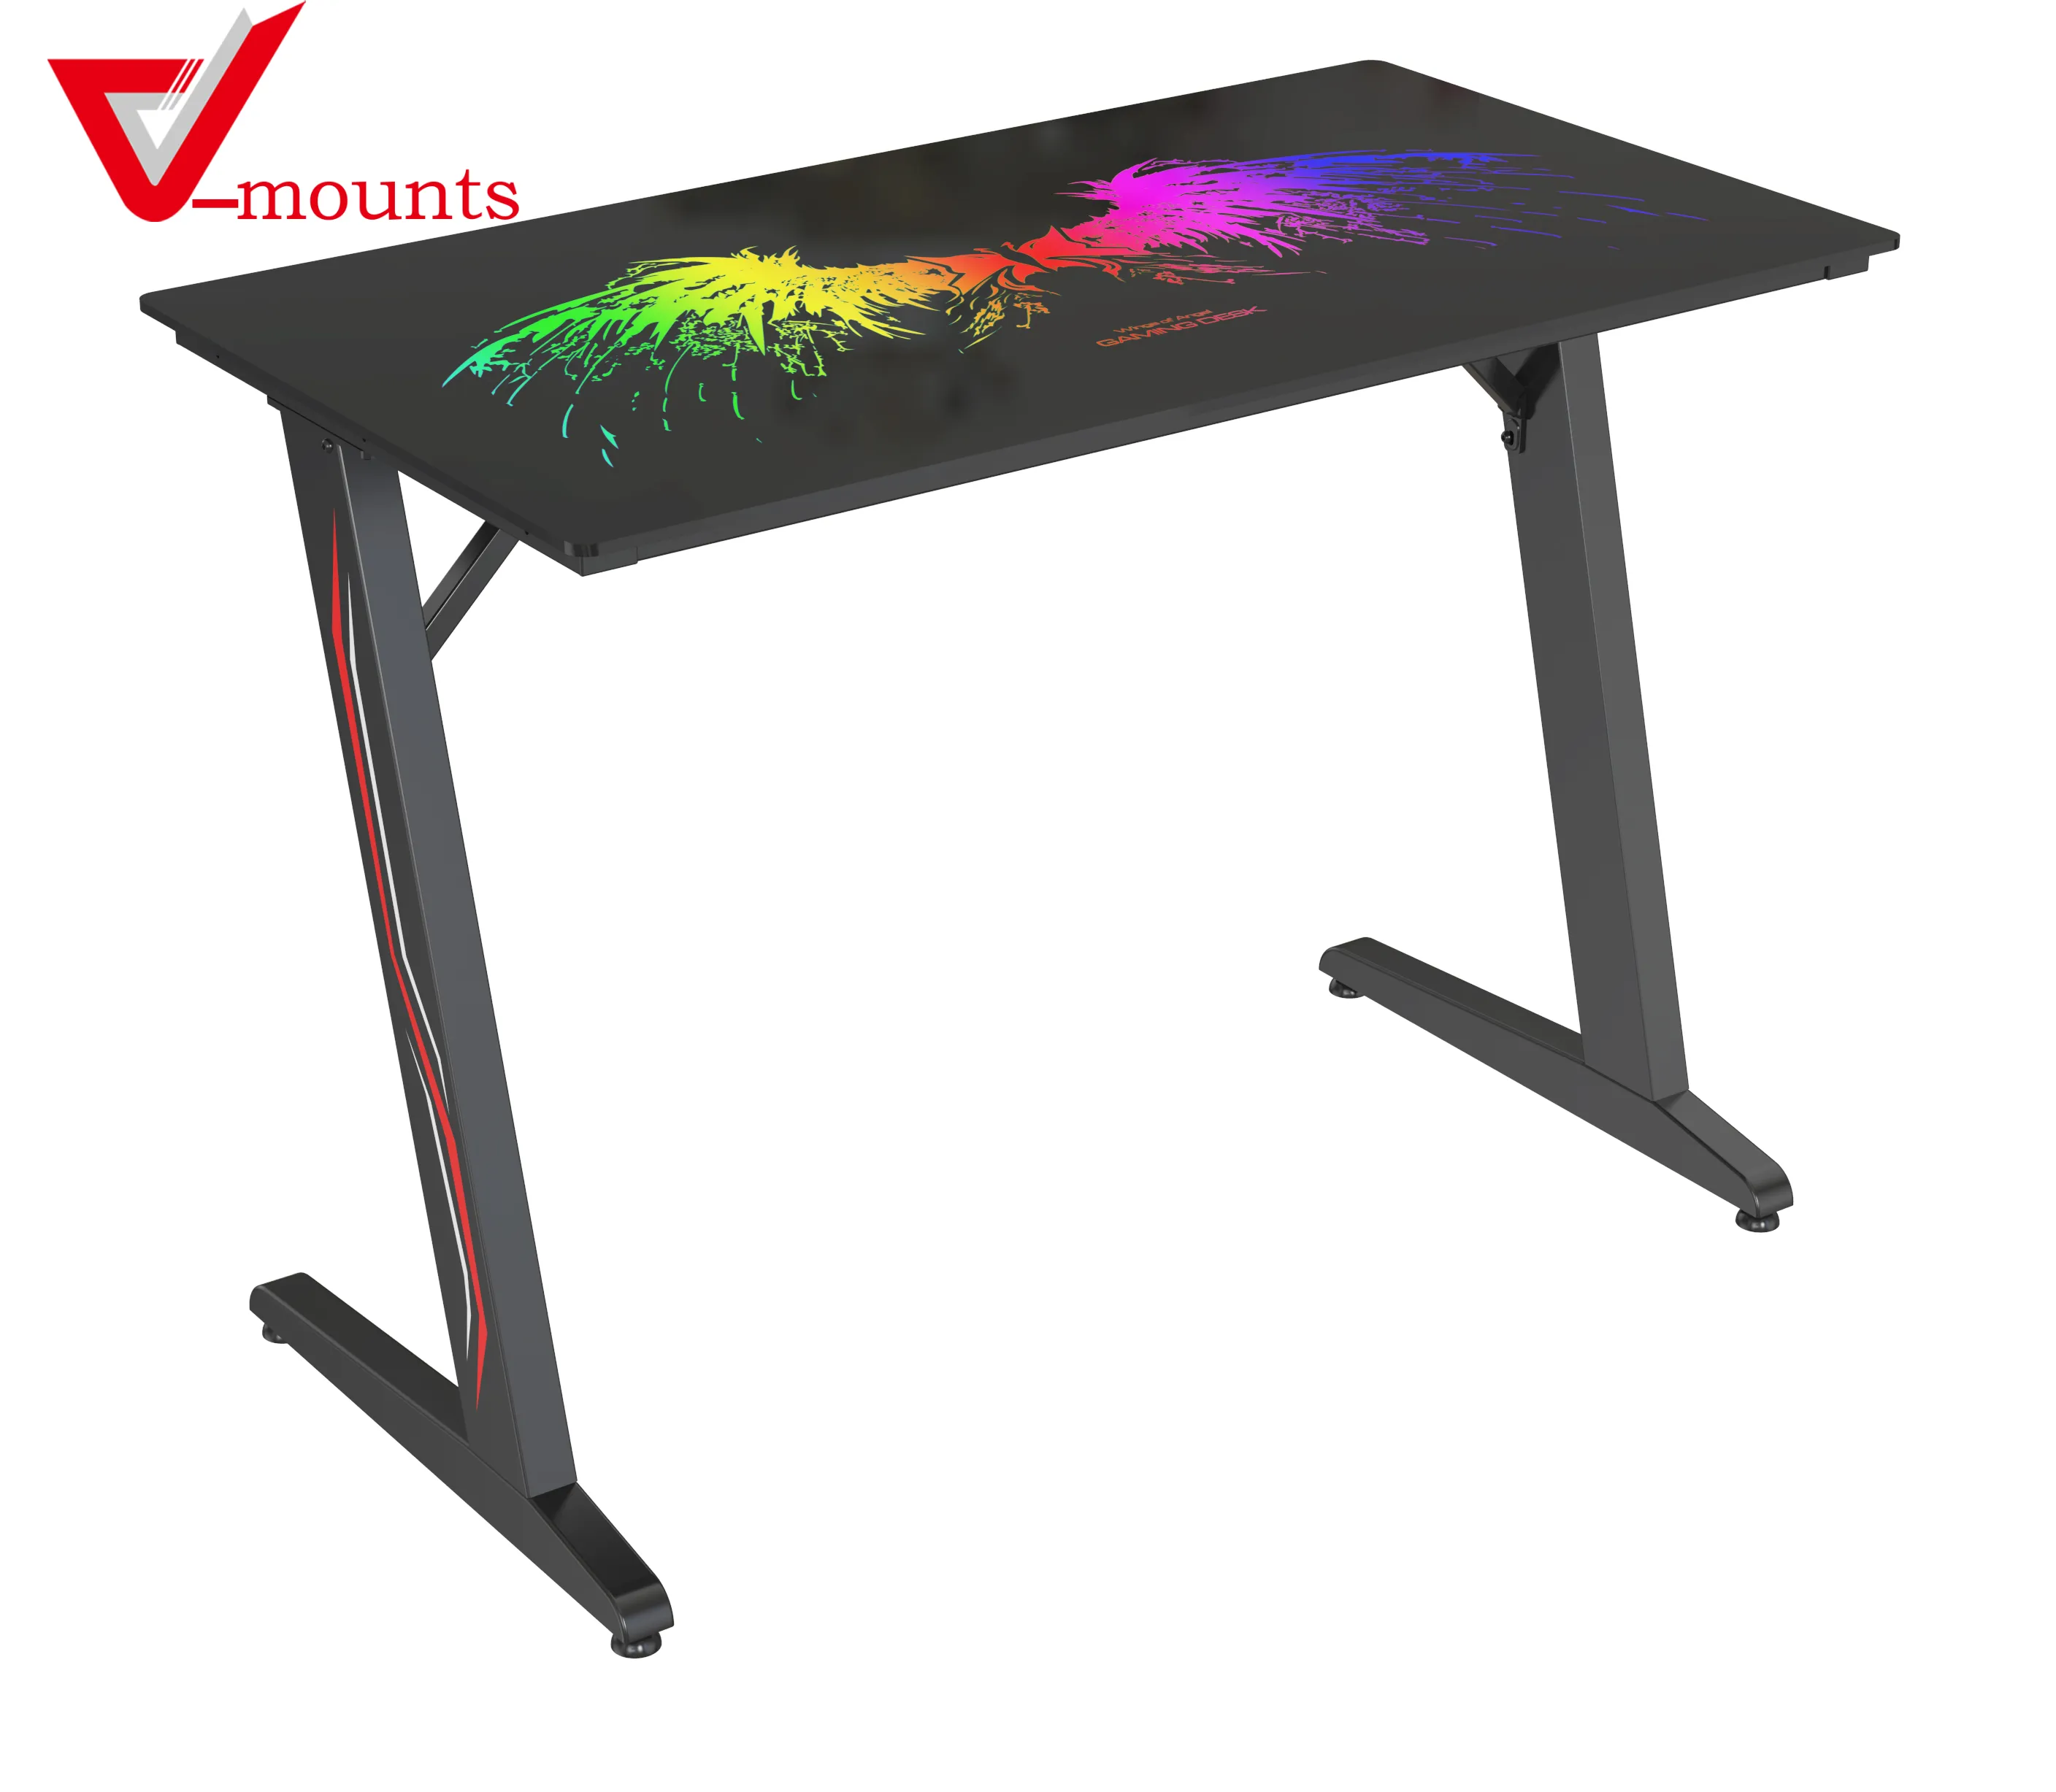 V-mounts Modern furniture Z-shaped table legs picture black gaming desk with colorful marquee desktop